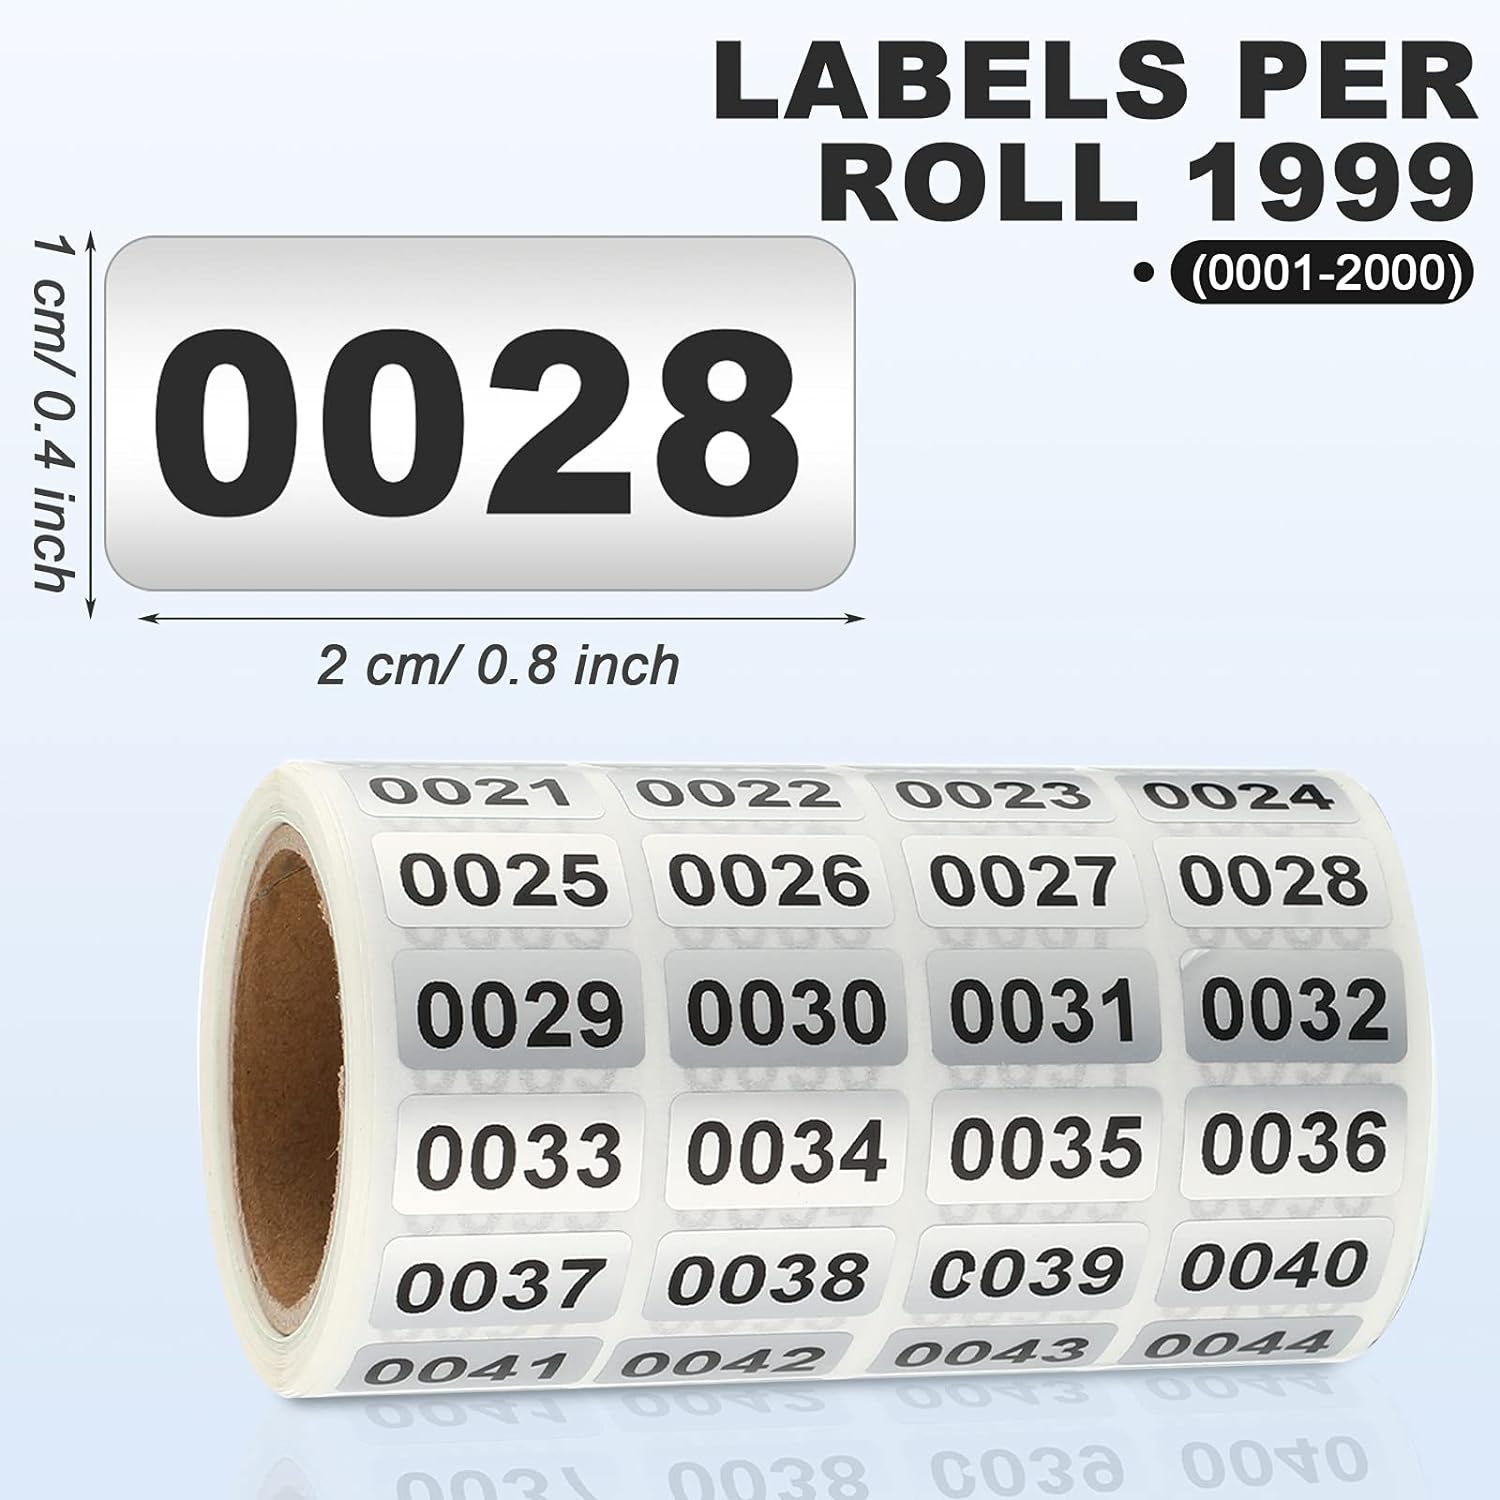 001-2000 Pcs Inventory Number Sticker Labels Self Adhesive Waterproof